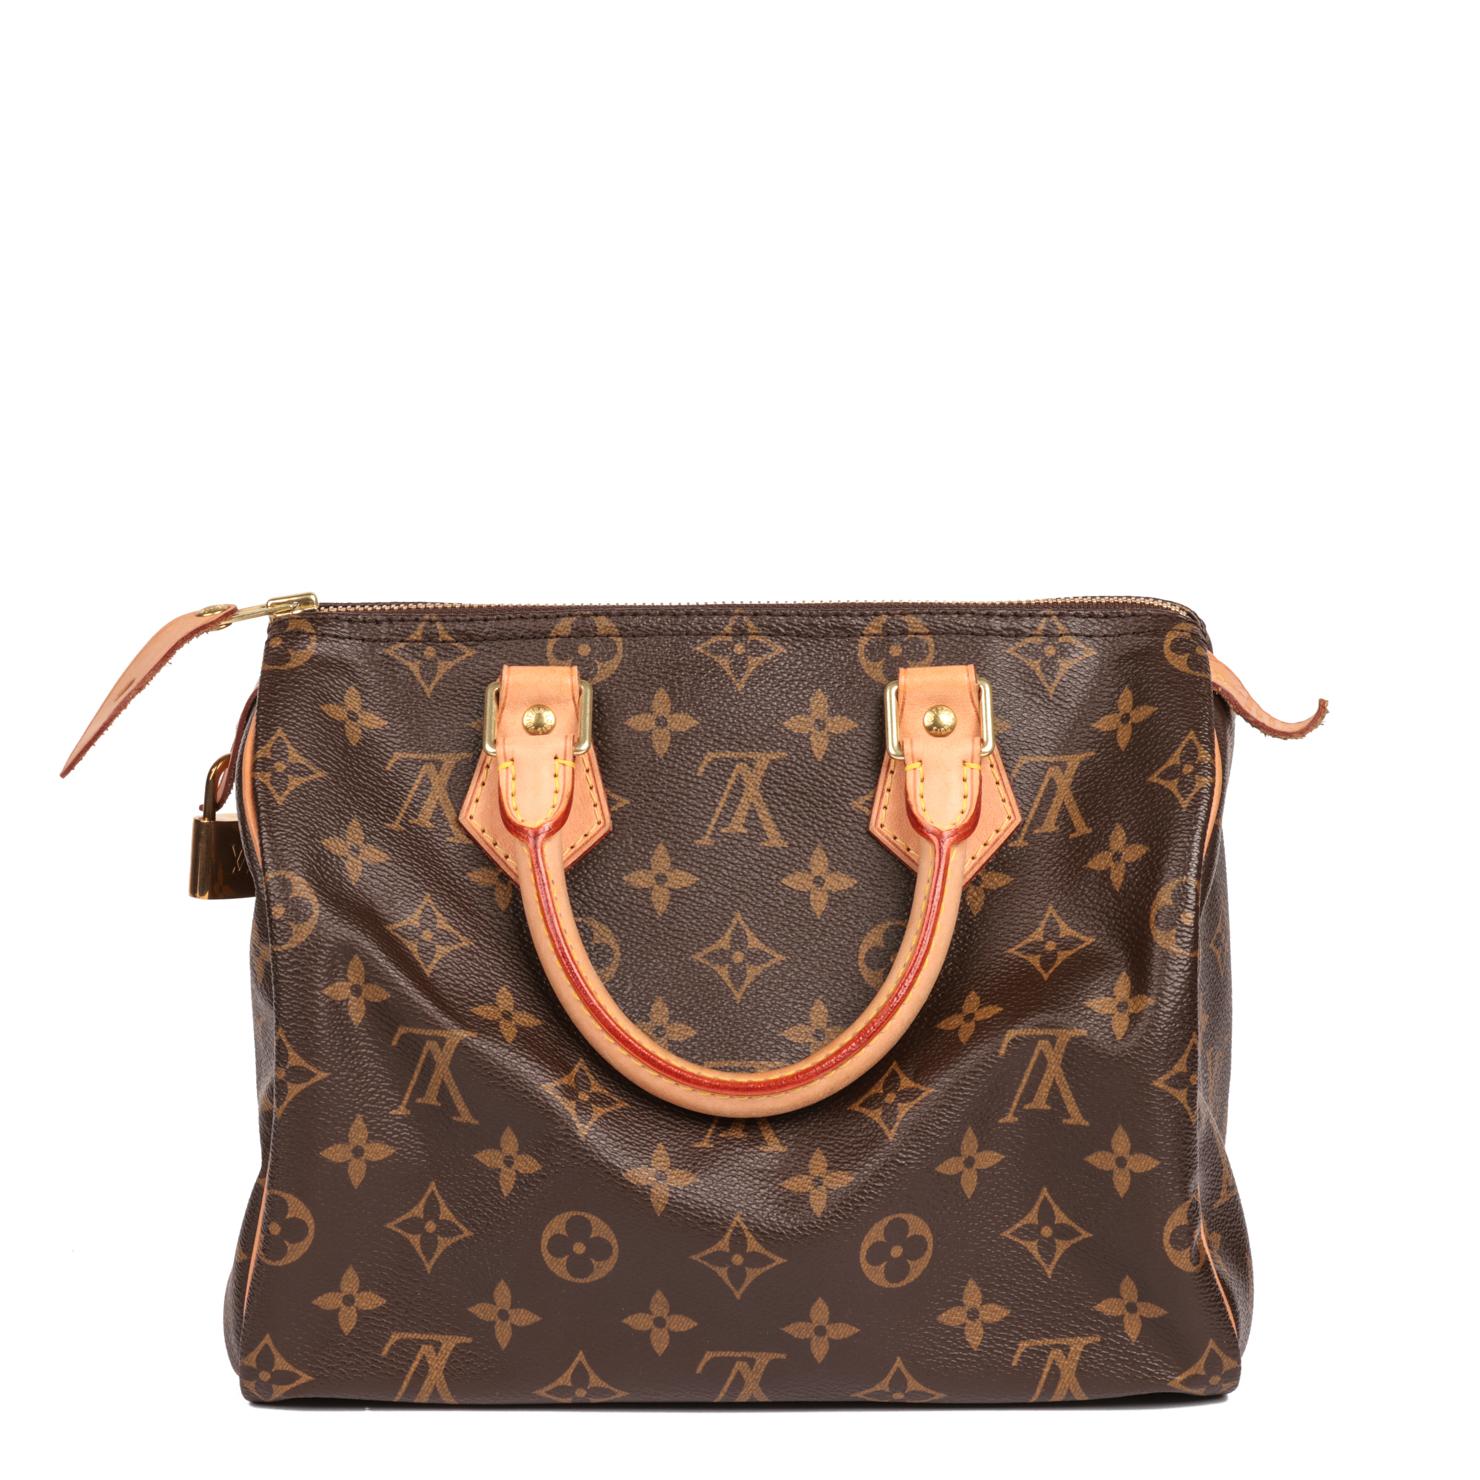 LOUIS VUITTON Brown Monogram Coated Canvas & Vacehtta Leather Speedy 25 1